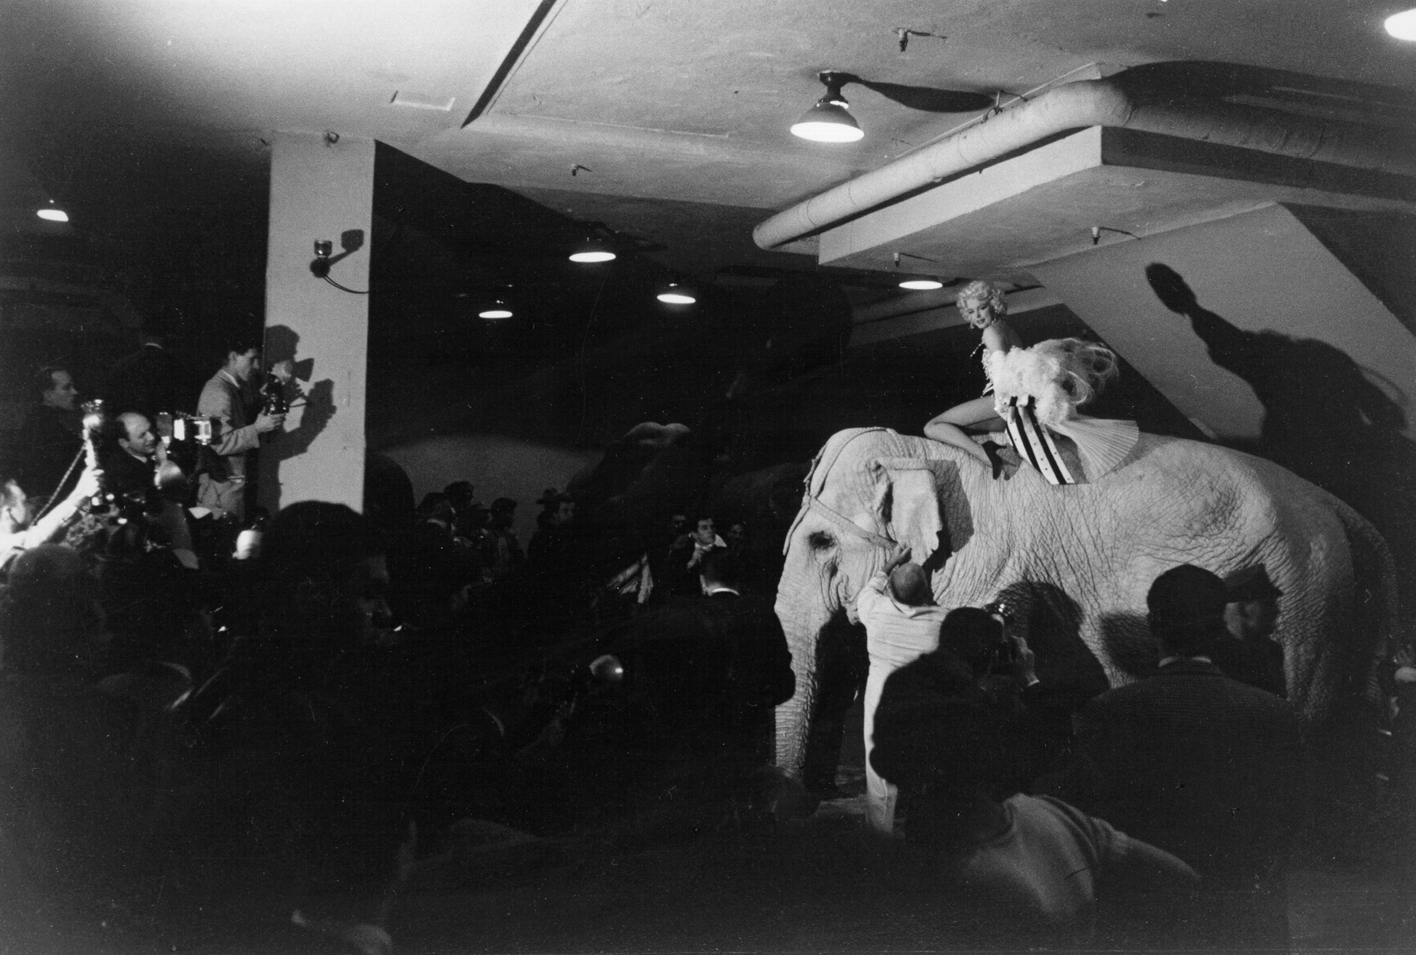 Monroe rides a pink elephant in Madison Square Garden for a circus charity event as she is surrounded by photographers in March 1955 in New York City.